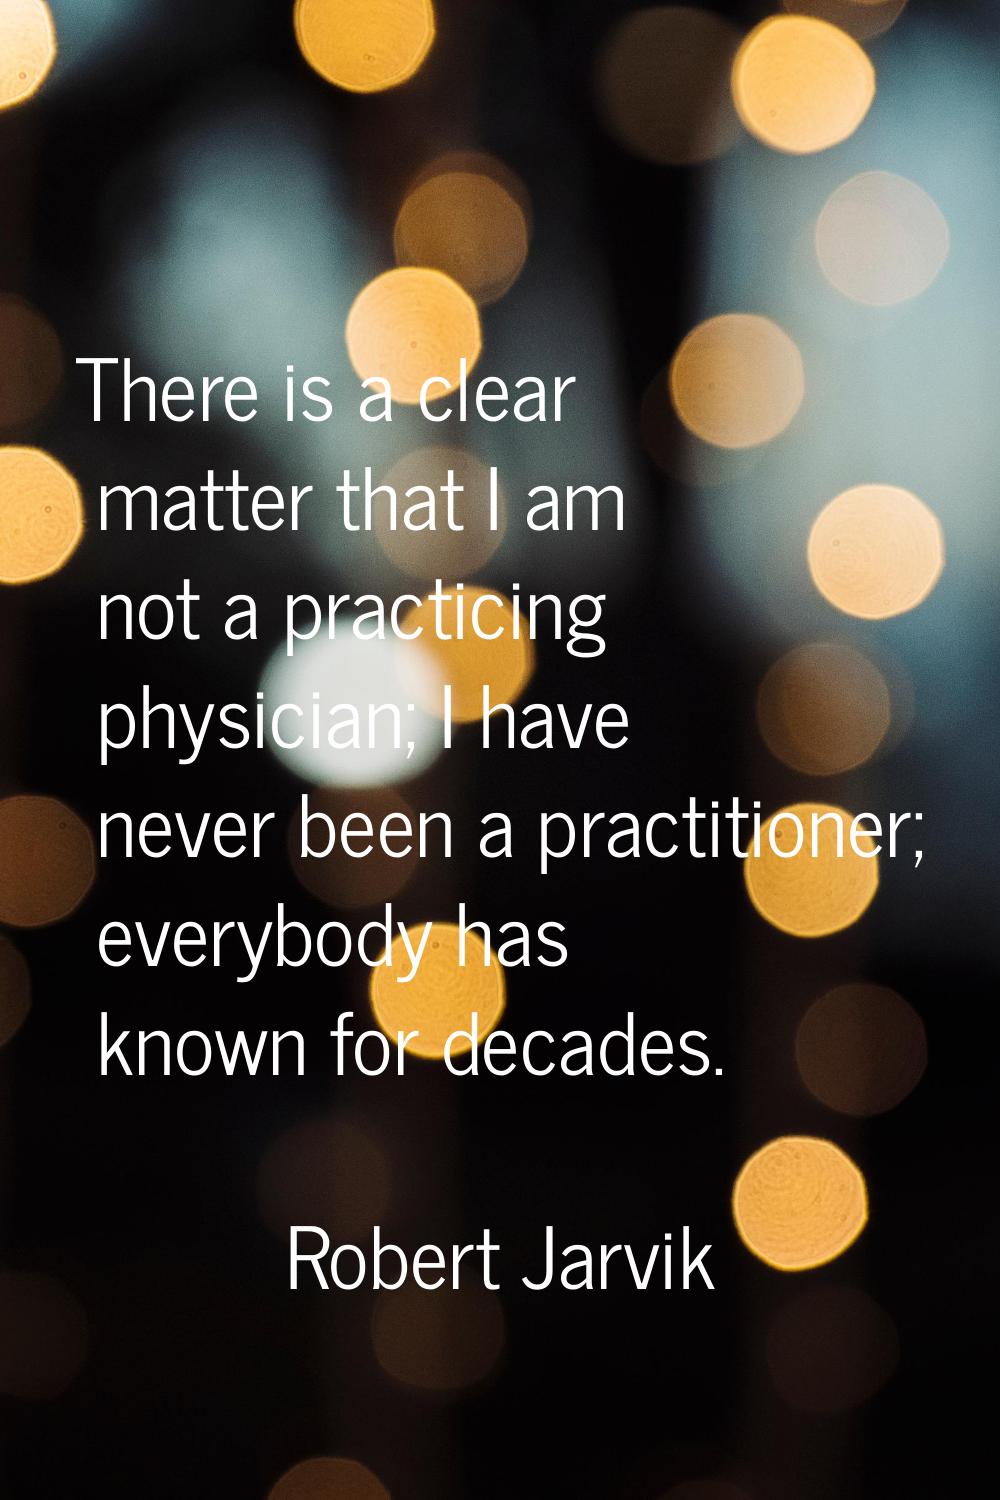 There is a clear matter that I am not a practicing physician; I have never been a practitioner; eve